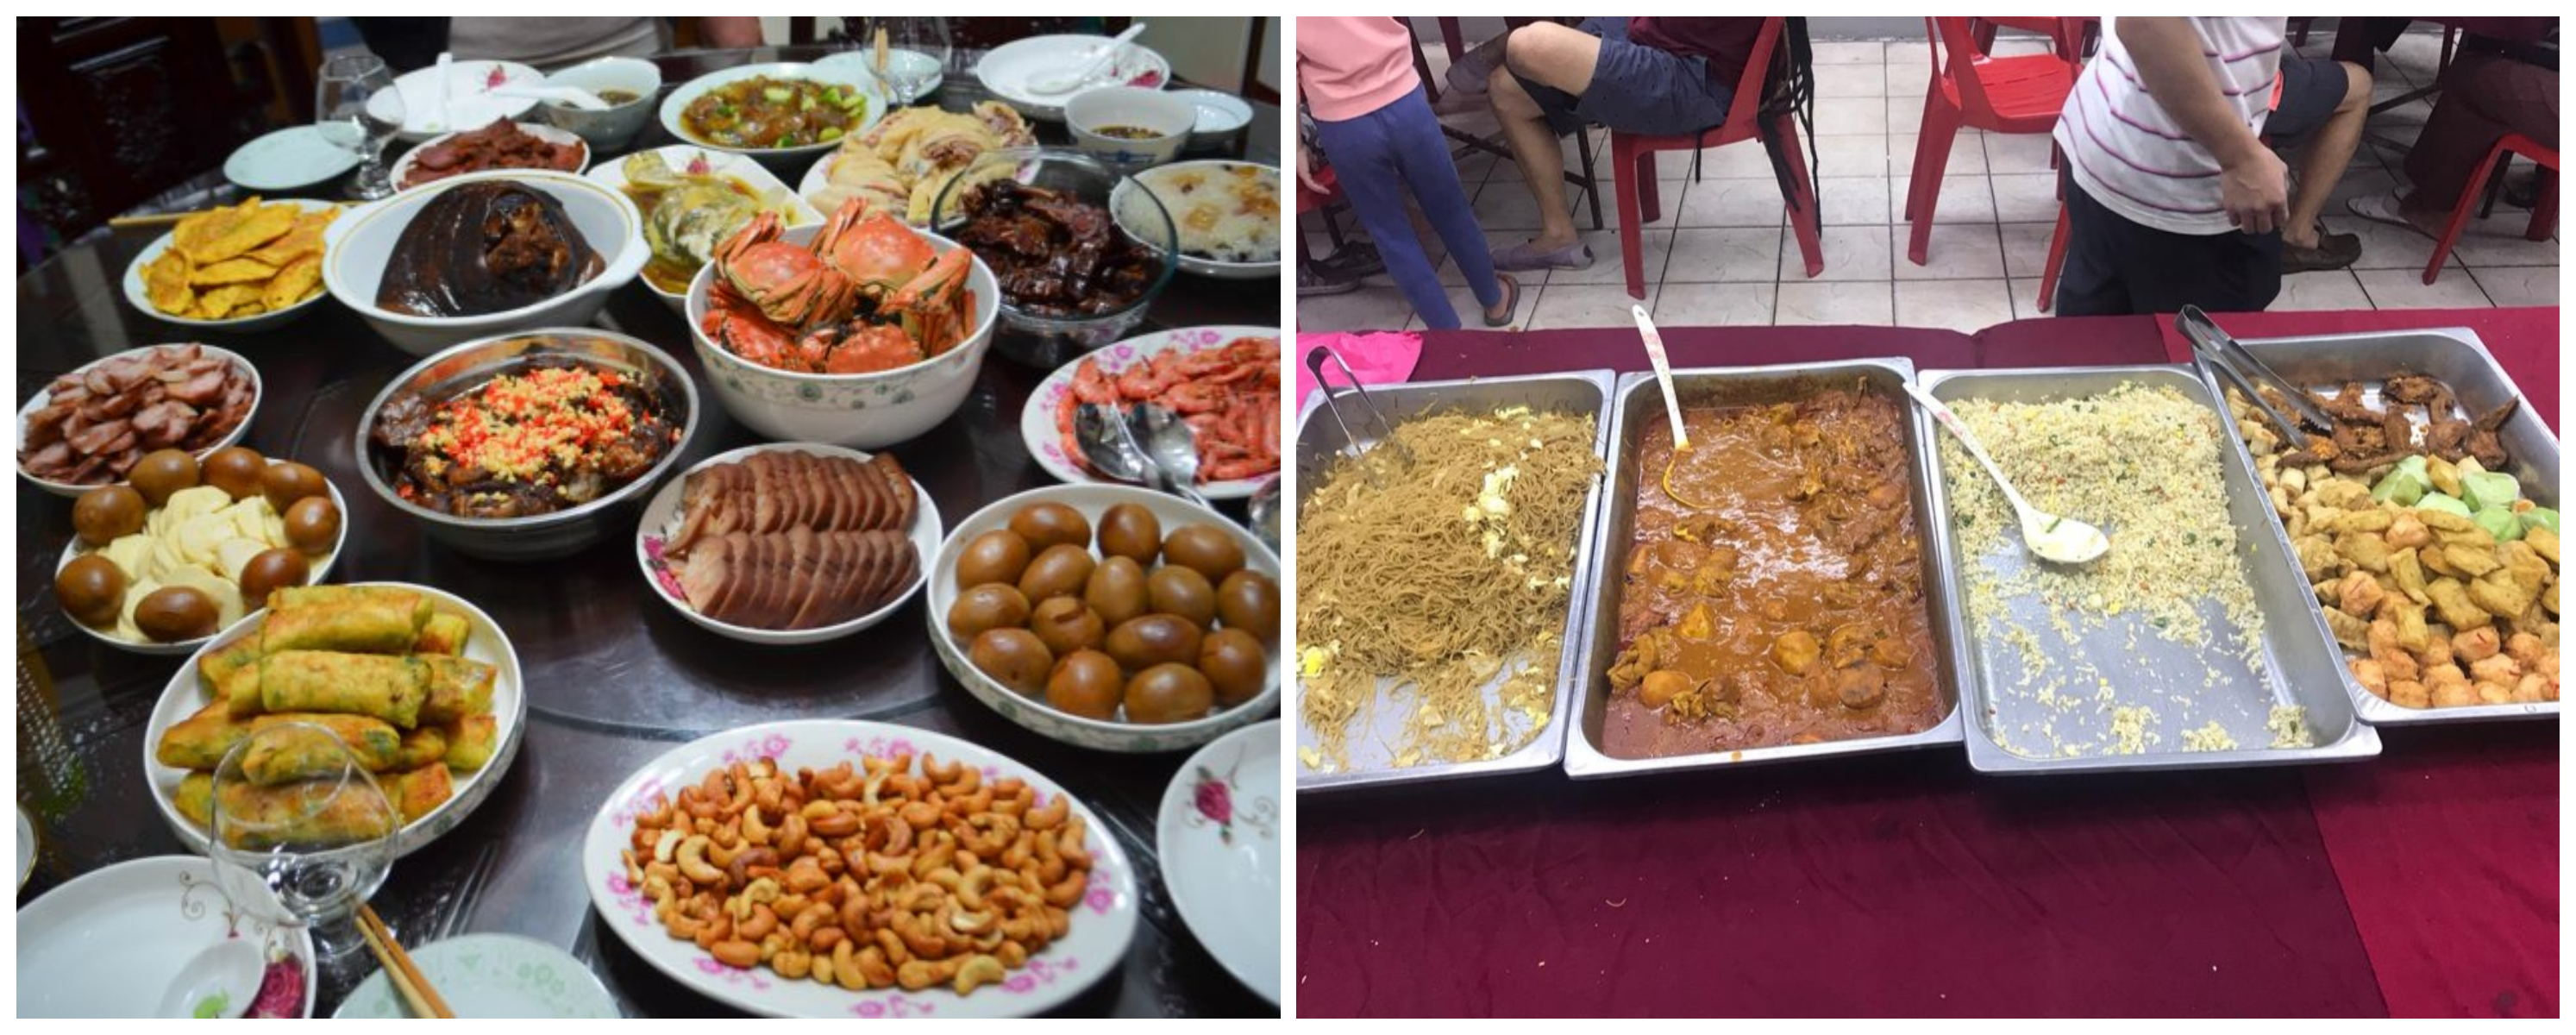 See what we mean? CNY food (left) vs leftovers (right). Images from LA Weekly and What A Waste